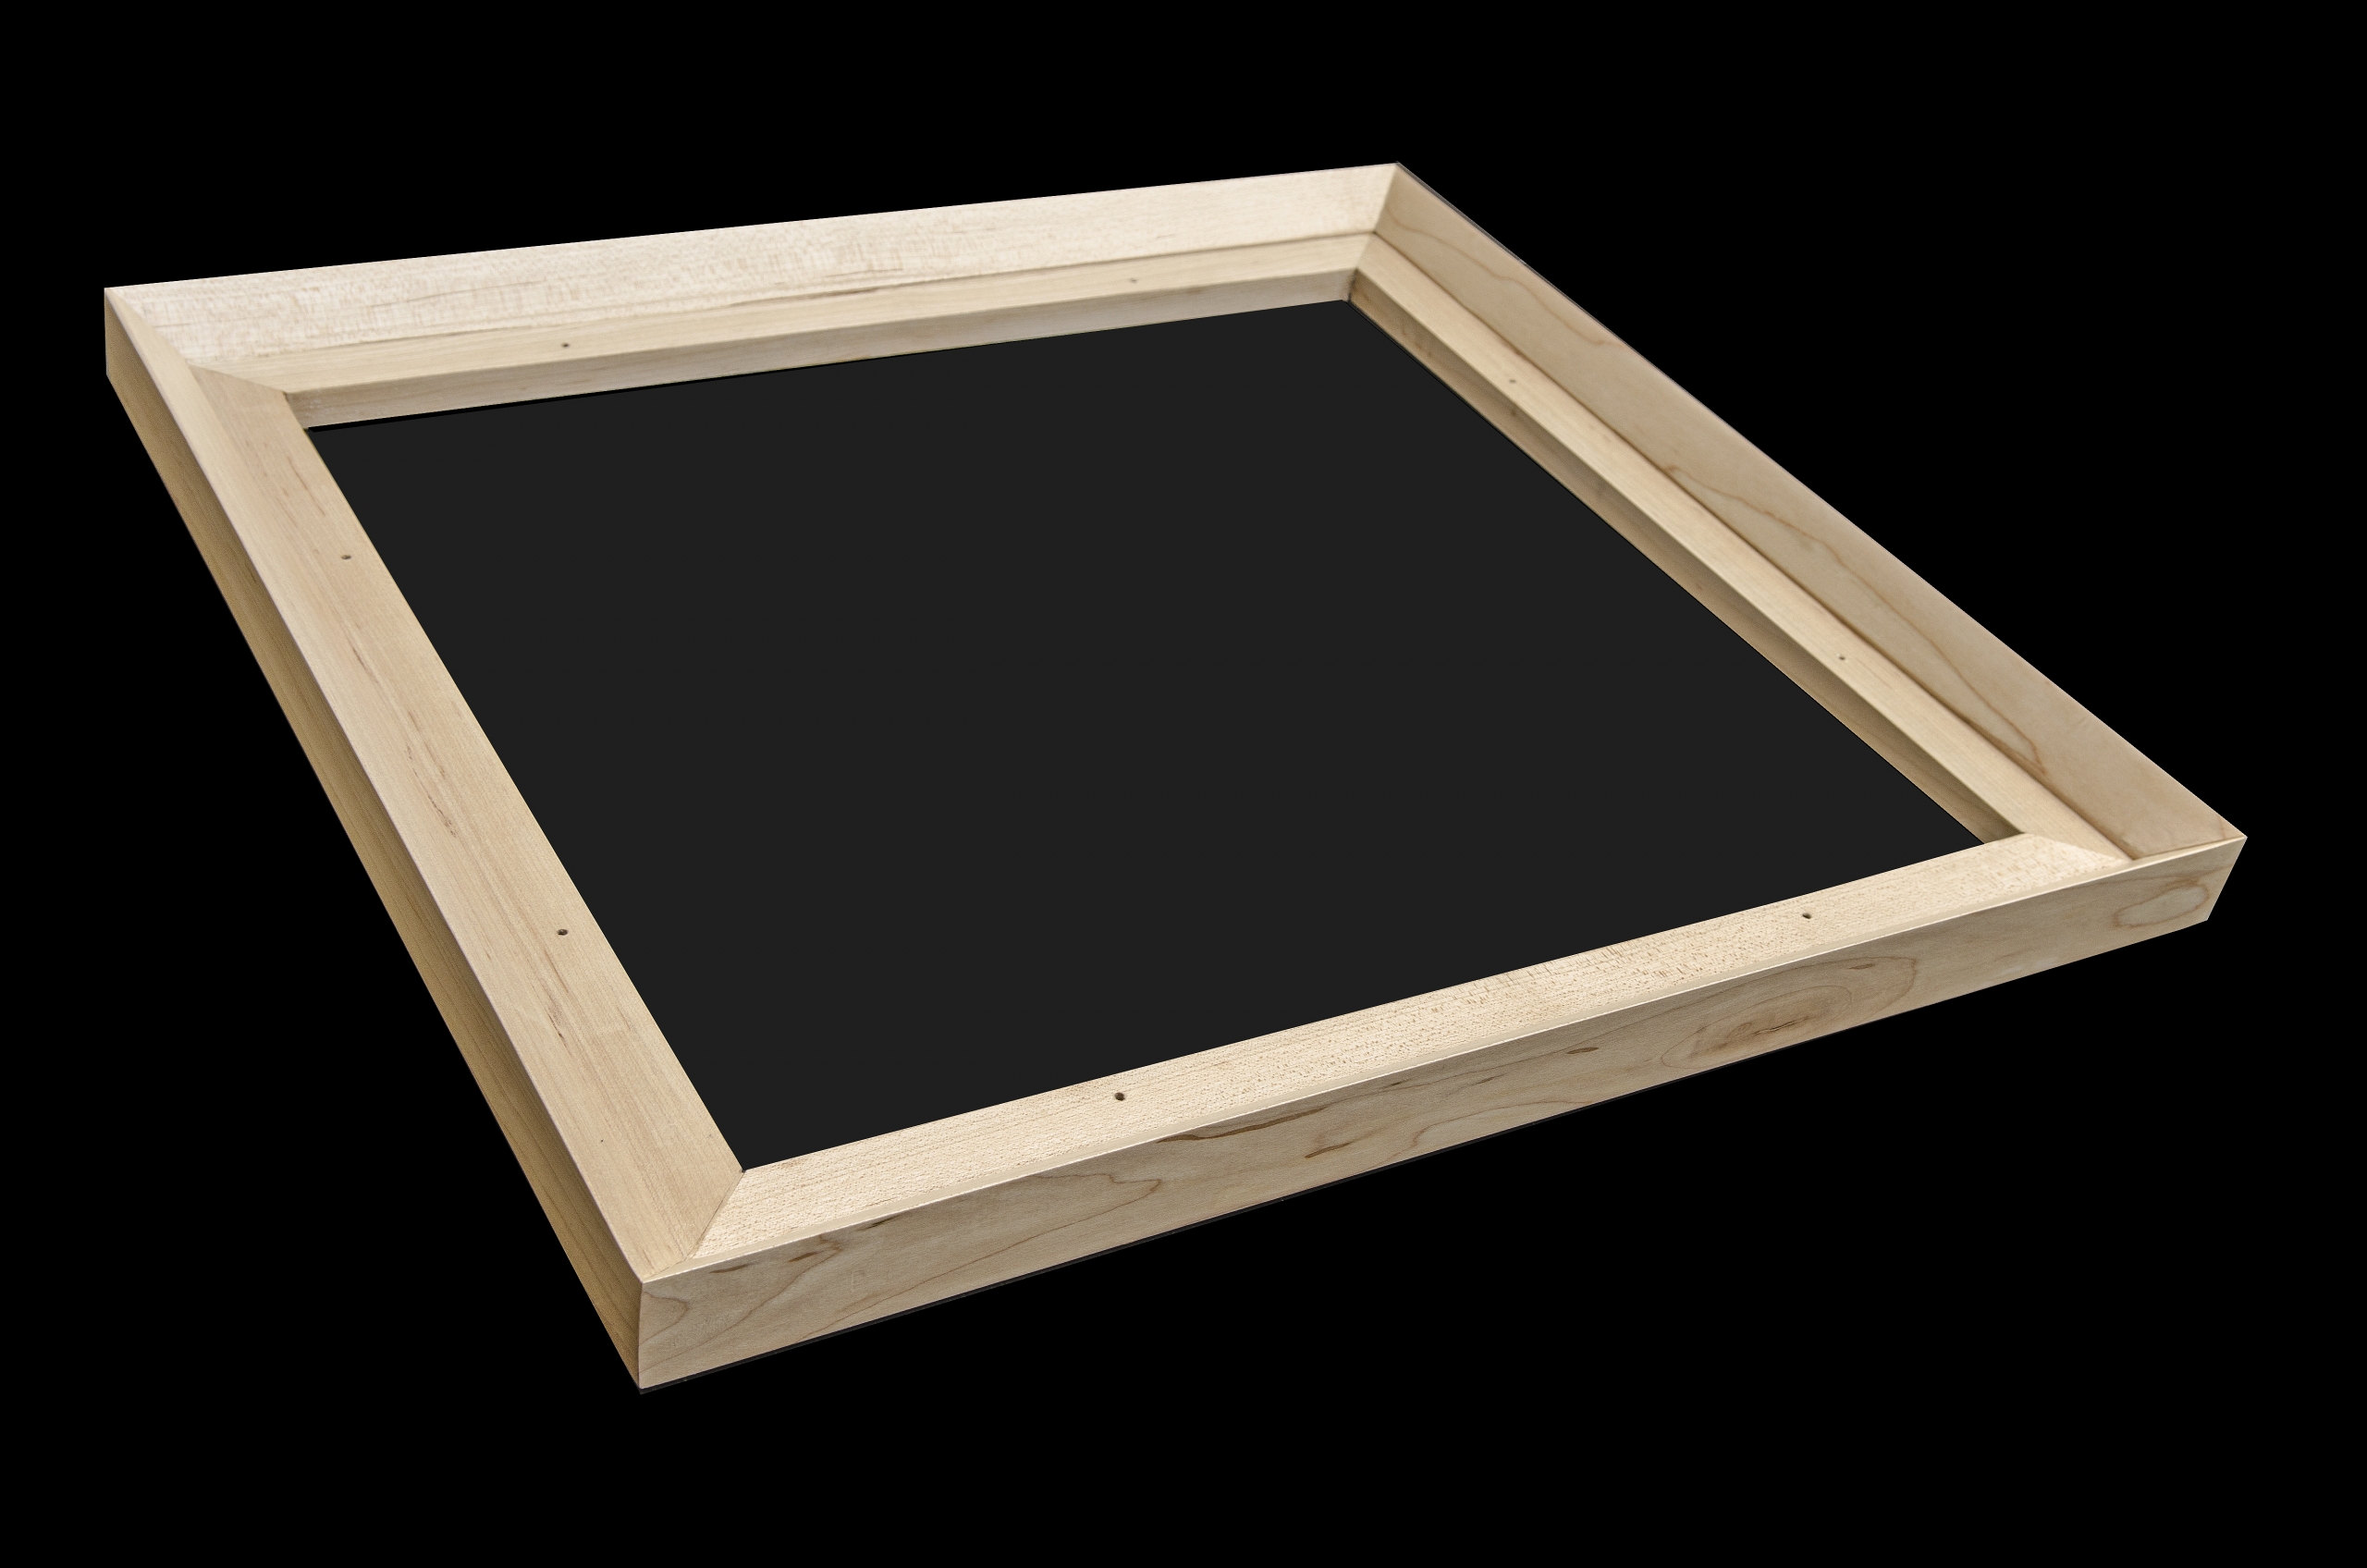 Maple Picture Frame for Eric B. (Designed by Client, Built by Vik Lai)